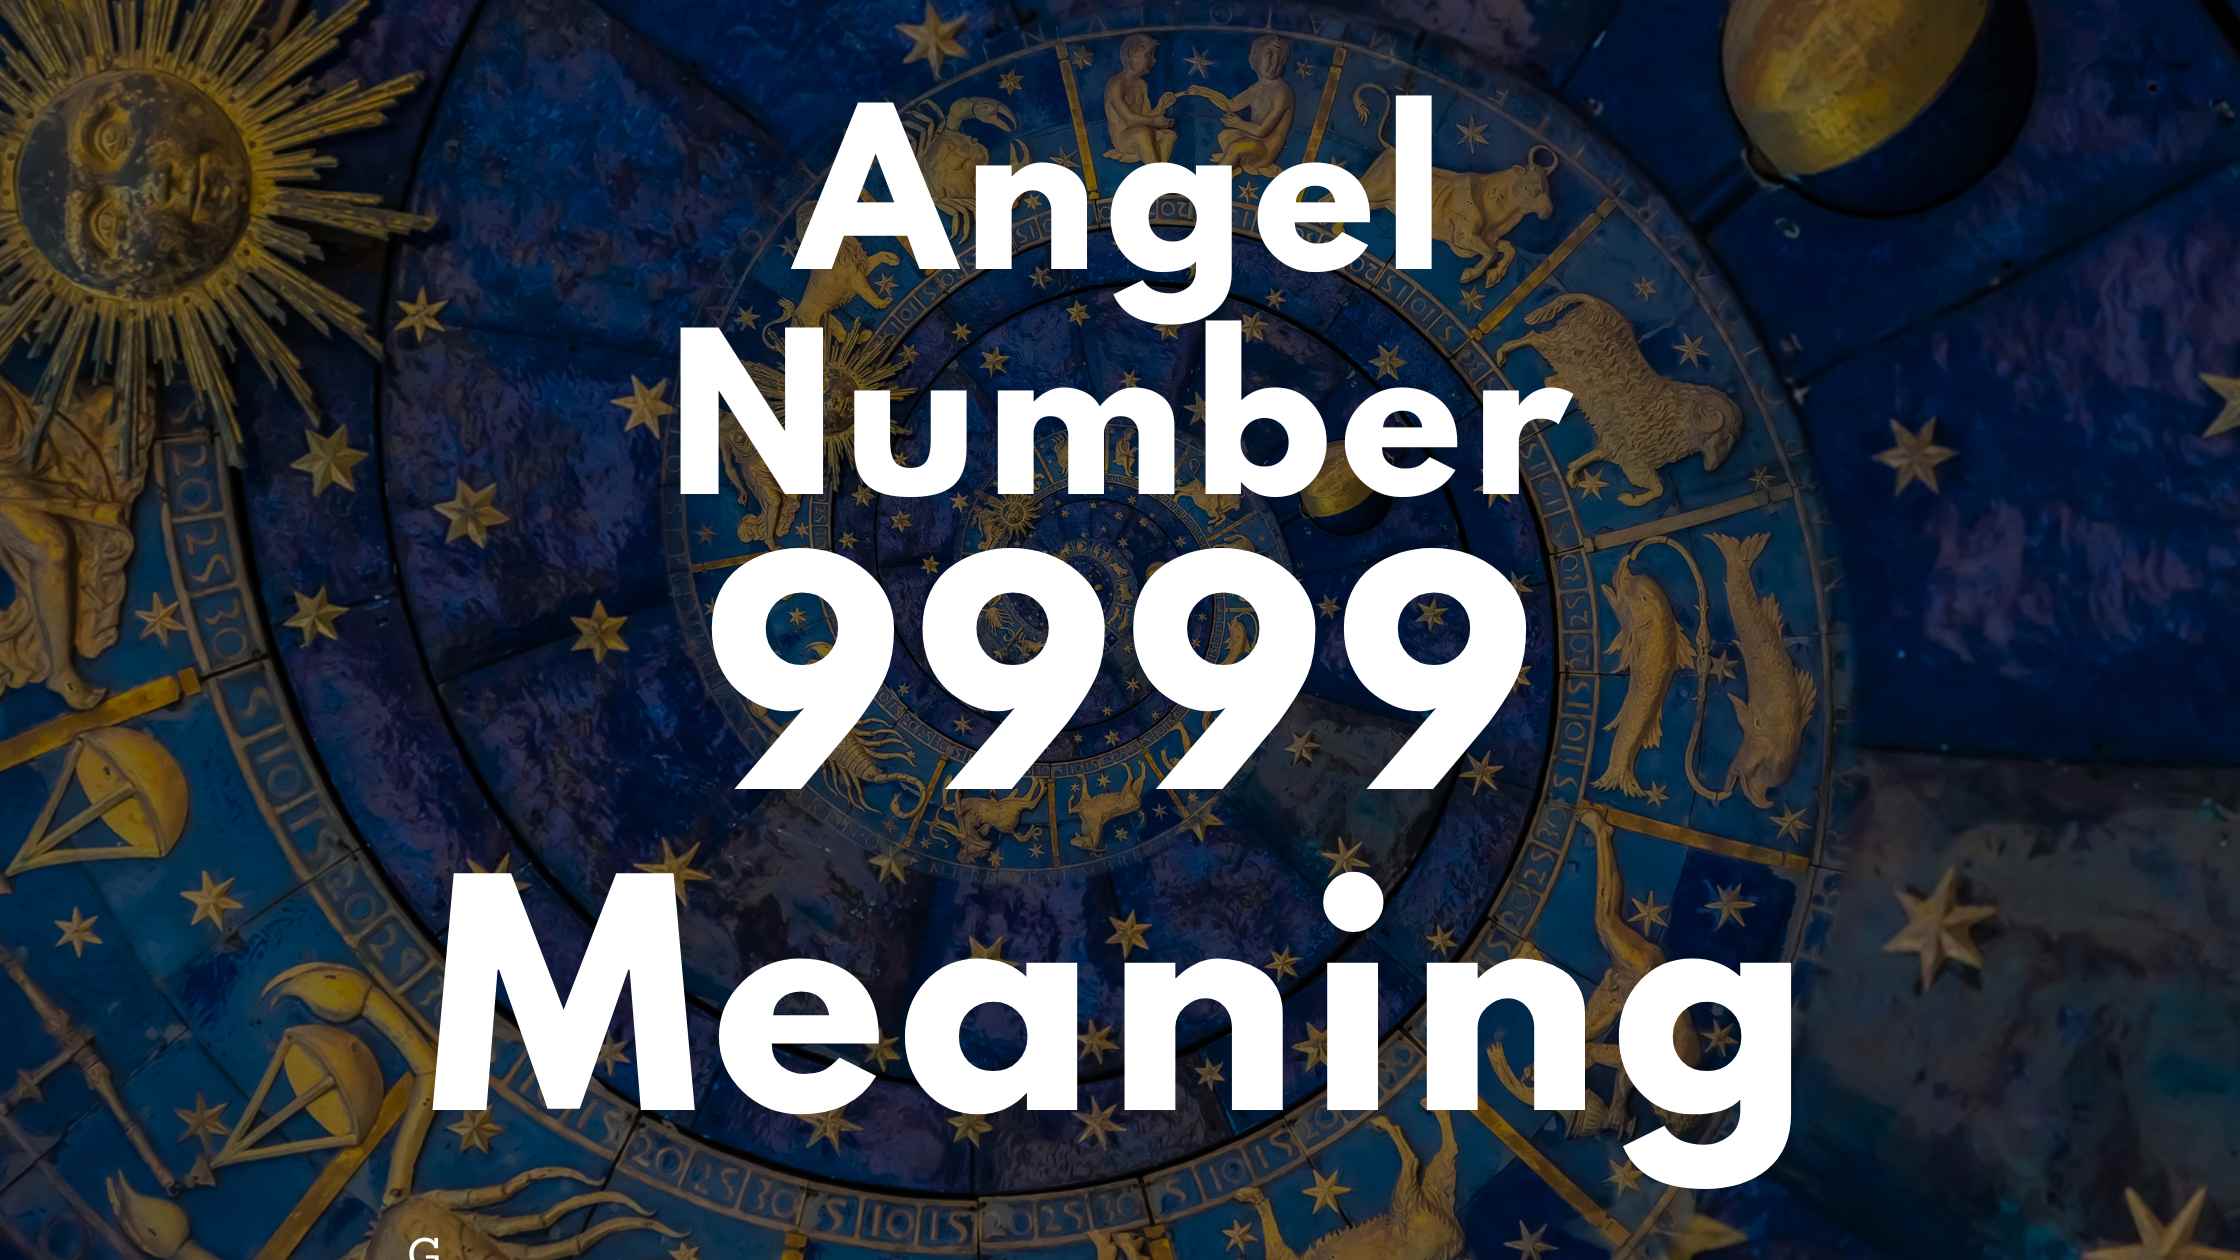 Angel Number 9999 Spiritual Meaning, Symbolism, and Significance